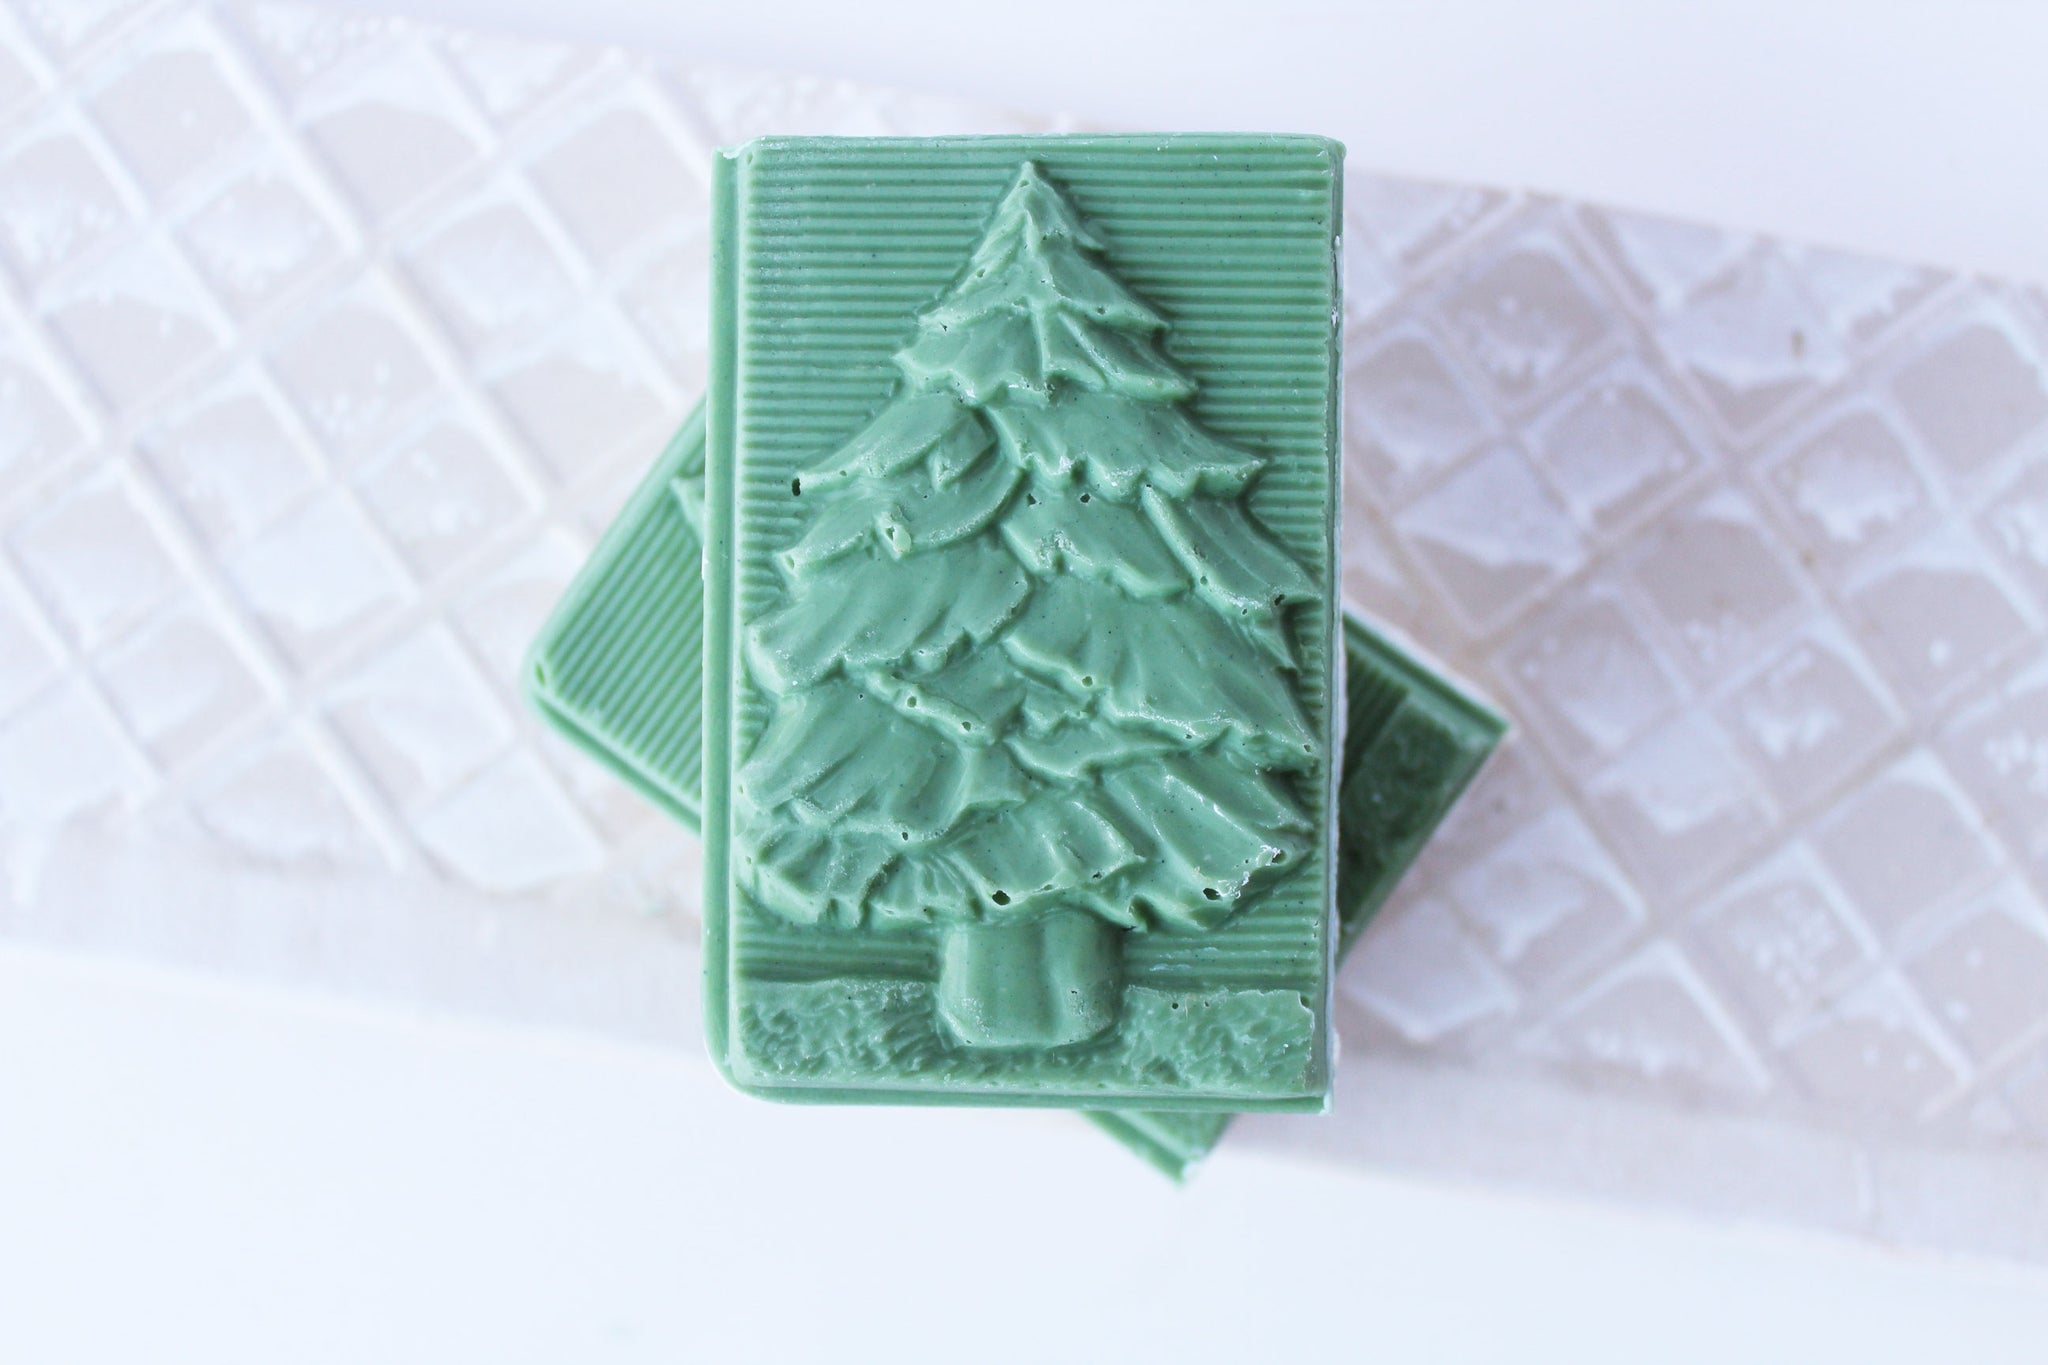 Balsam fir needle Windsong fresh outdoor walking in the forest scent soap bar Vermont Lavender